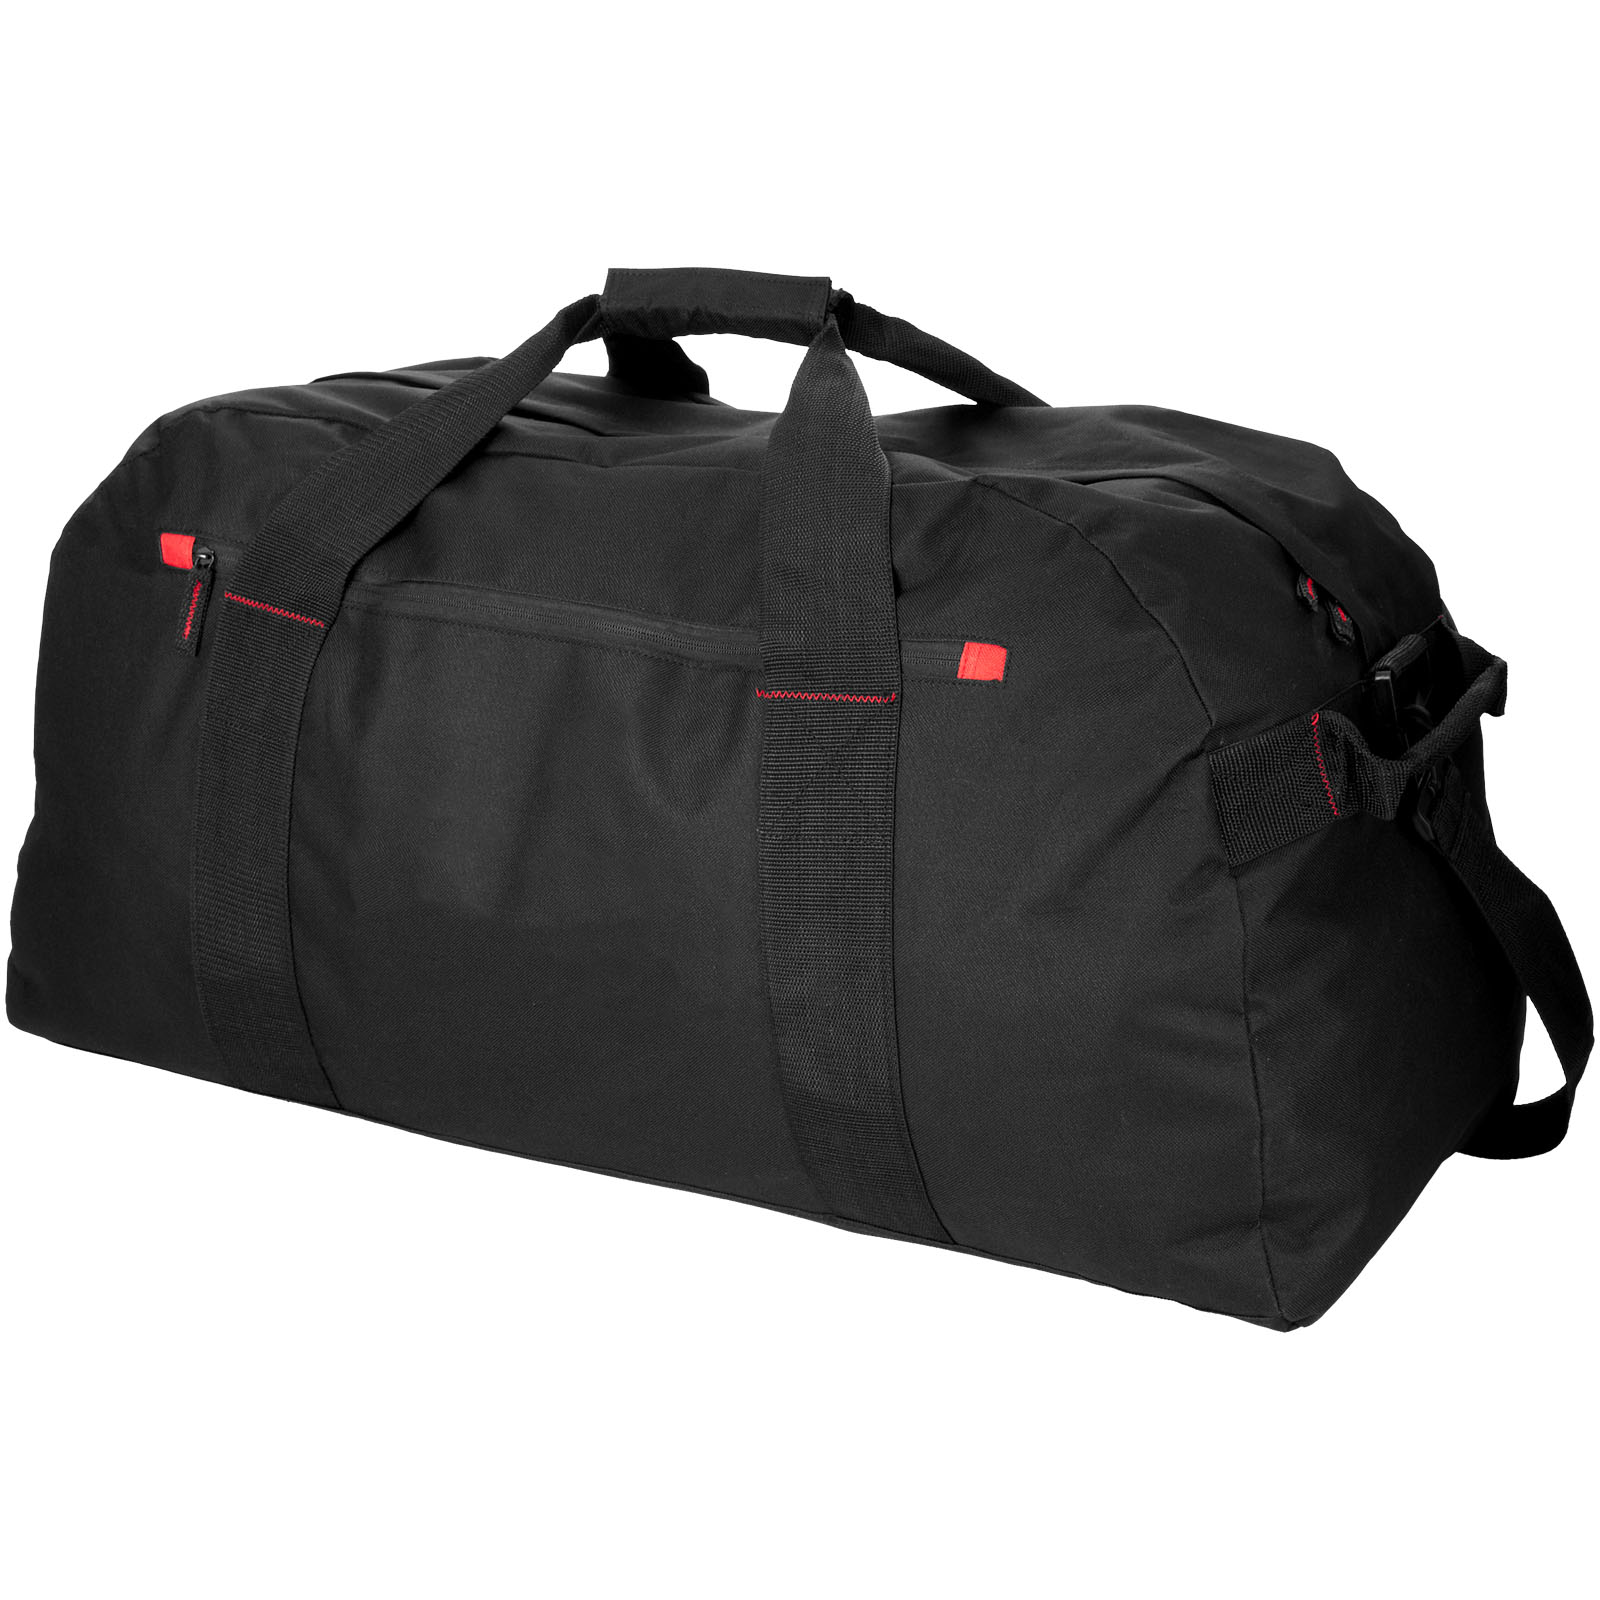 Bags - Vancouver extra large travel duffel bag 75L